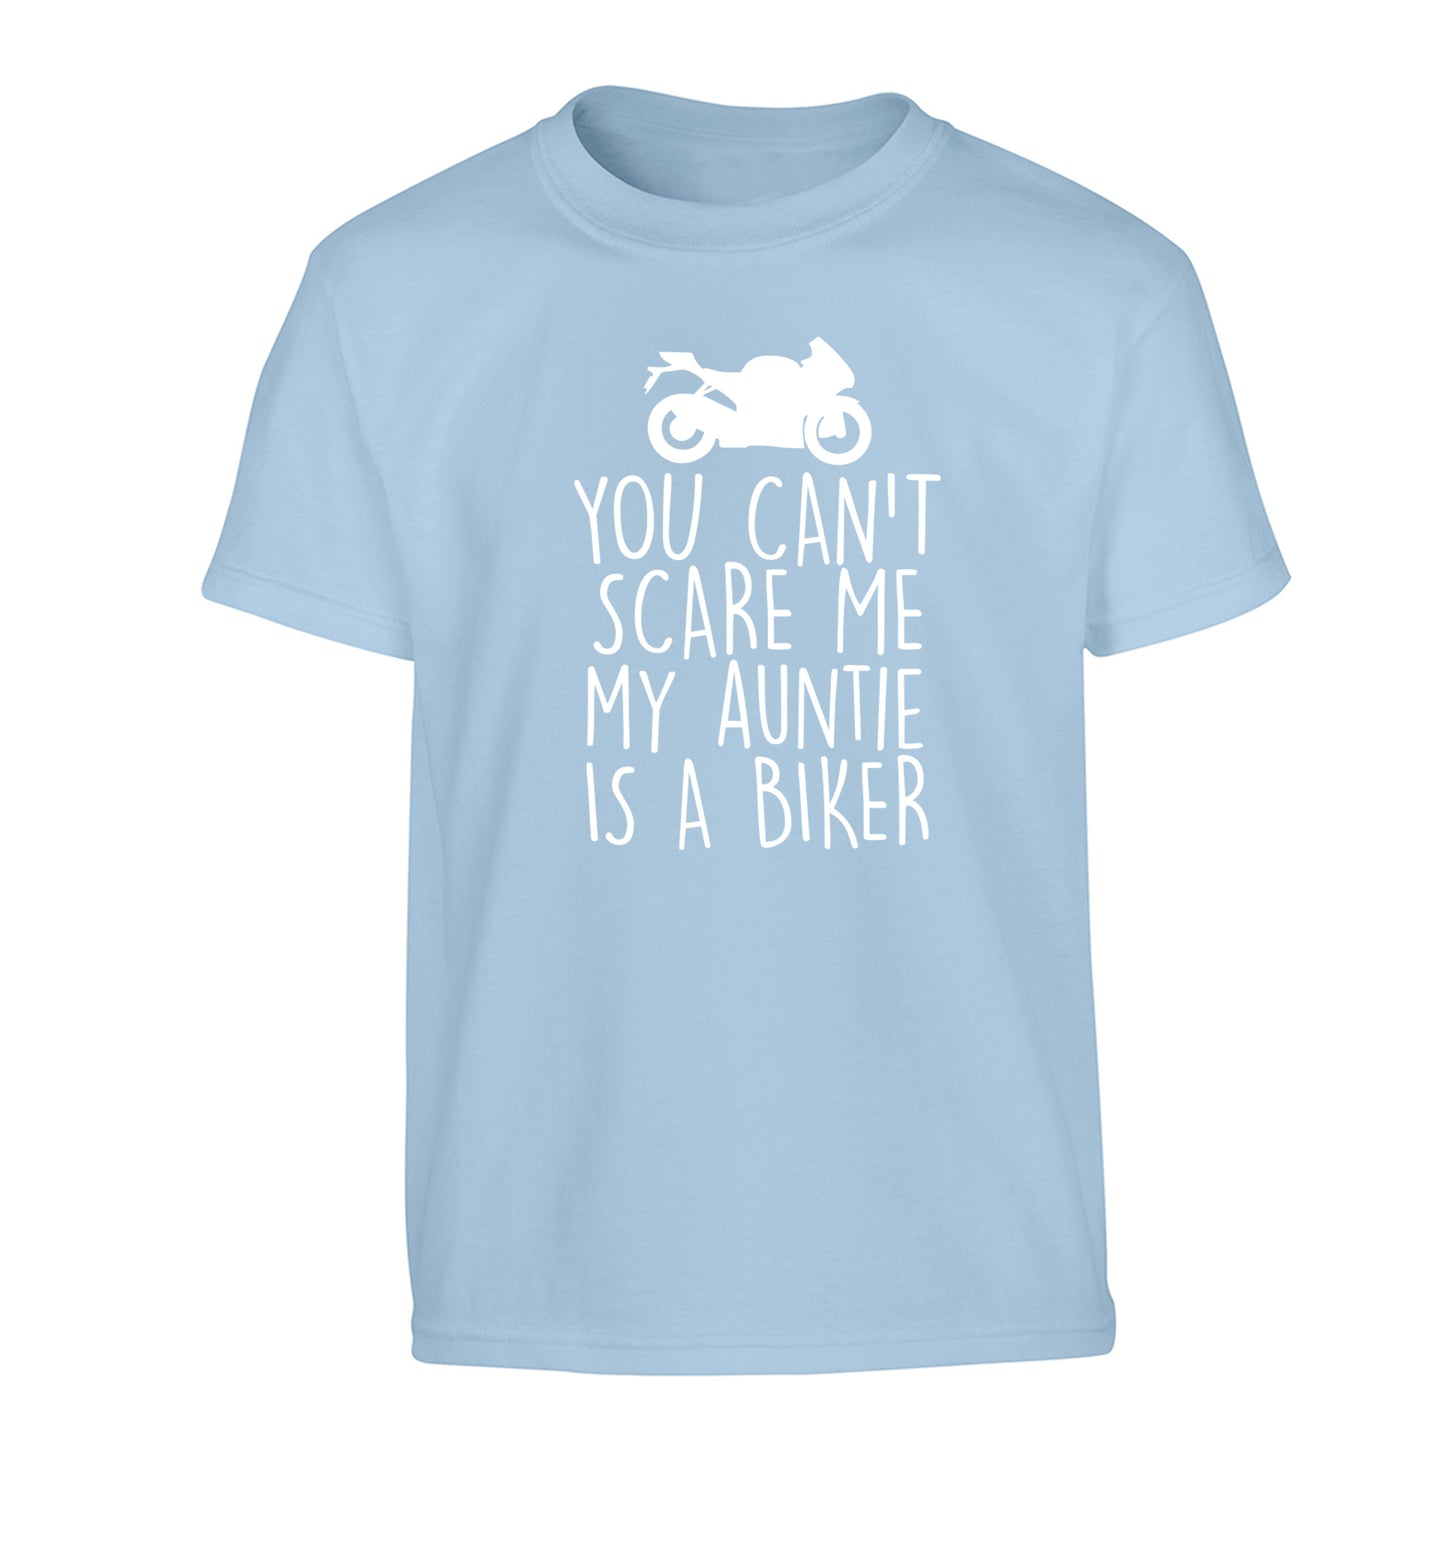 You can't scare me my auntie is a biker Children's light blue Tshirt 12-13 Years